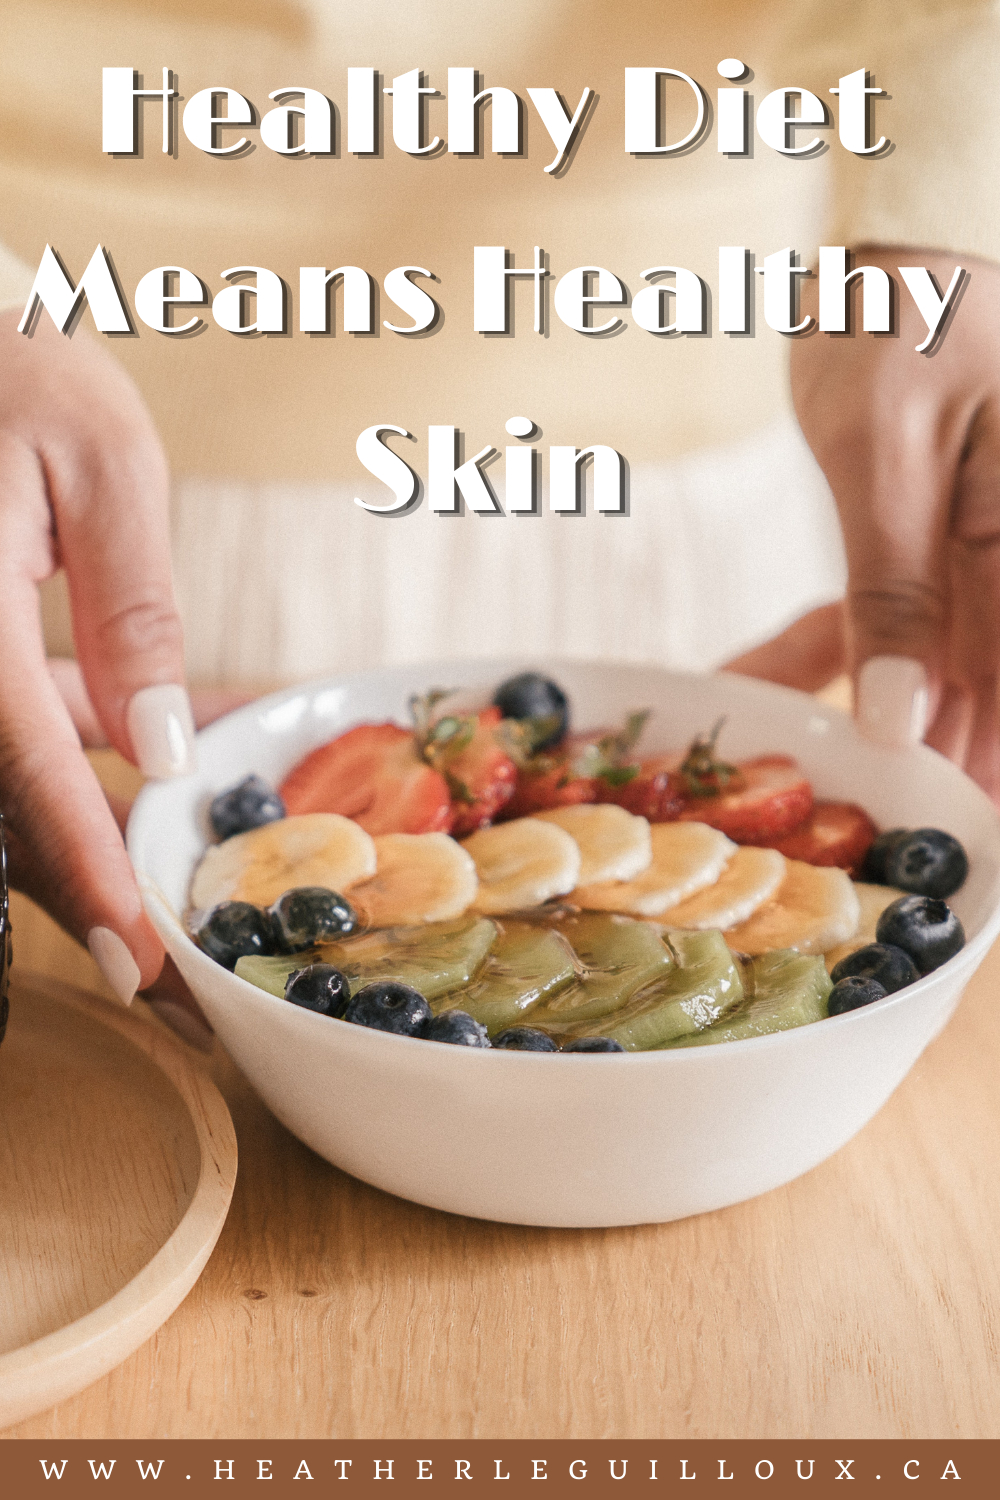 How your skin looks is a reflection of your overall health; if you’re eating healthy, then you’ll look healthy as well. Your skin is also the largest organ in your body, making it more important to take that extra step of caring for your dermal layer. #health #healthydiet #healthyskin